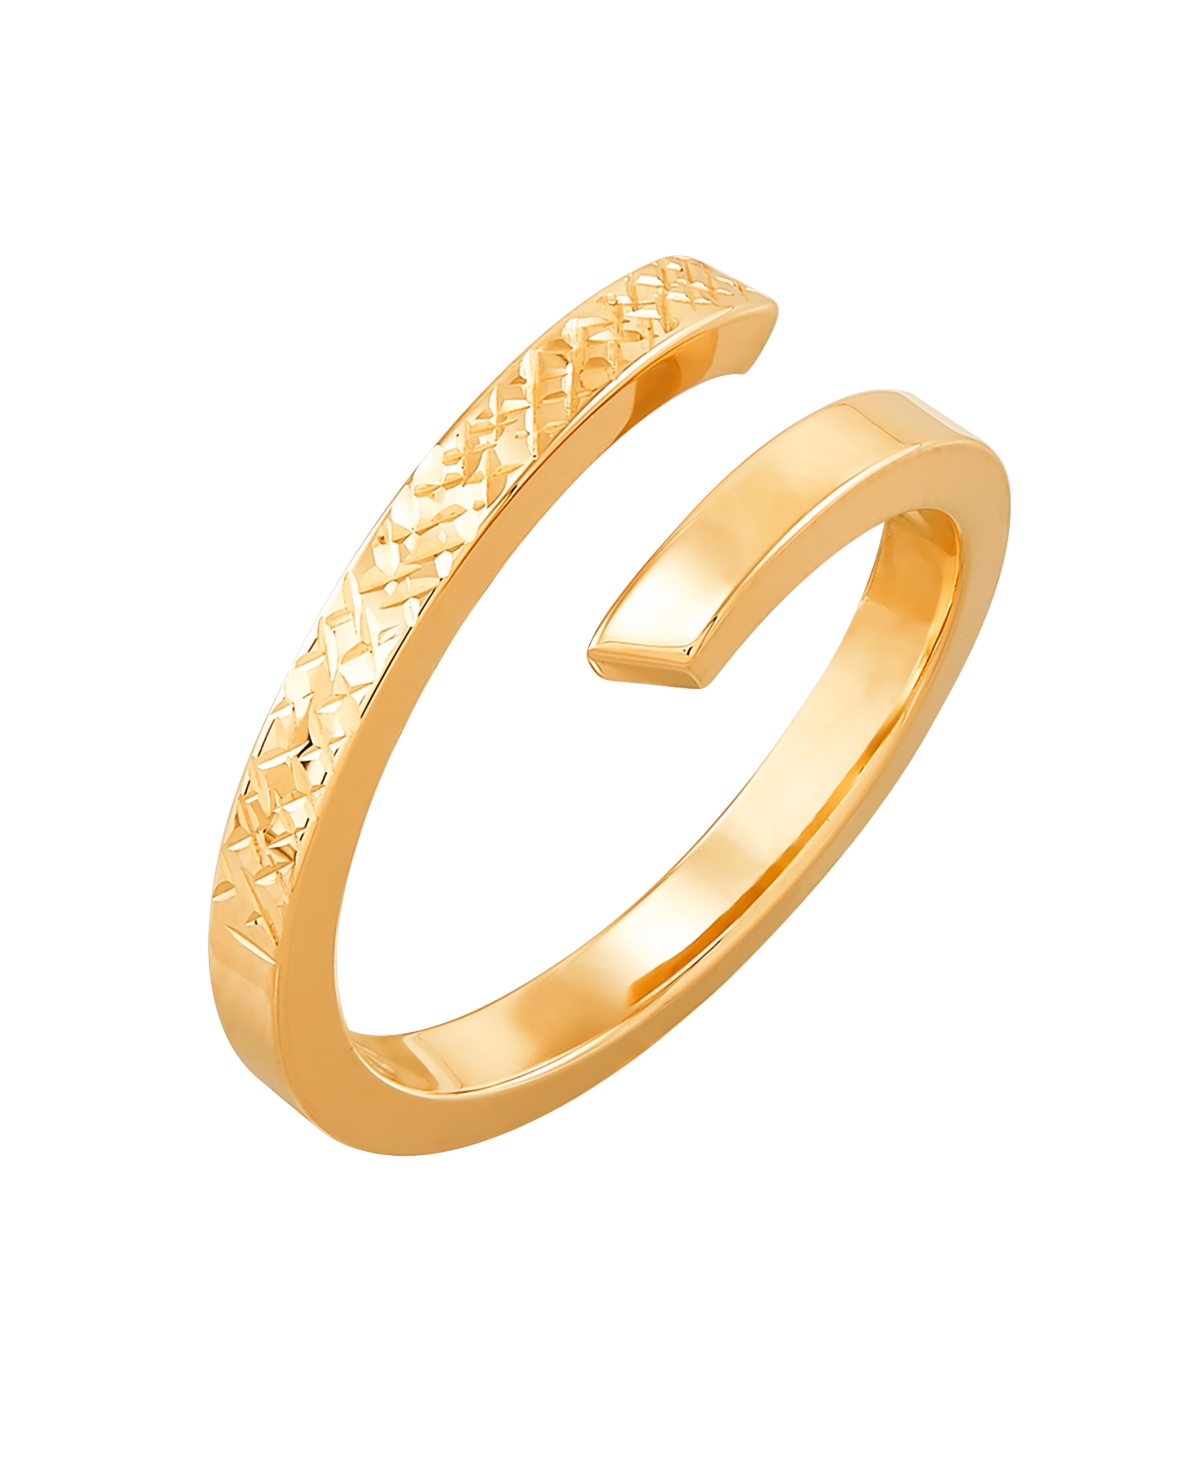 Polished Diamond Cut Bypass Ring in 10K Yellow Gold - Yellow Gold